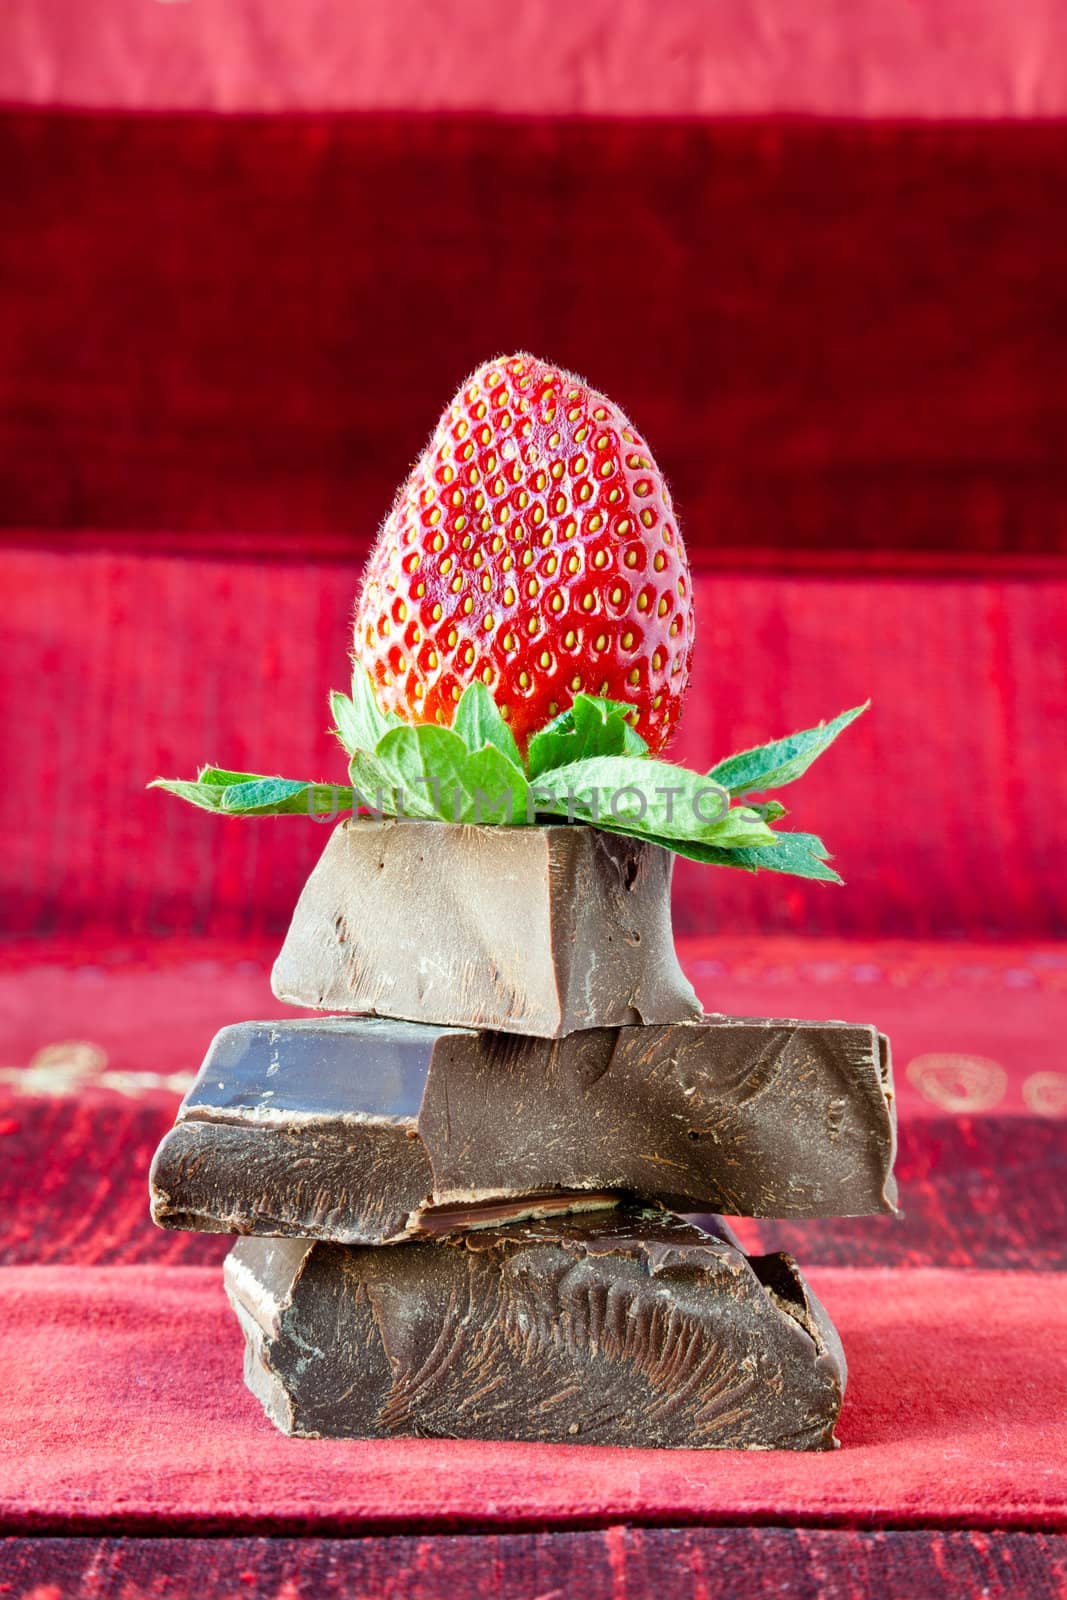 Strawberry on top of pile of gourmet thick dark chocolate bar chunks. Red textured background.